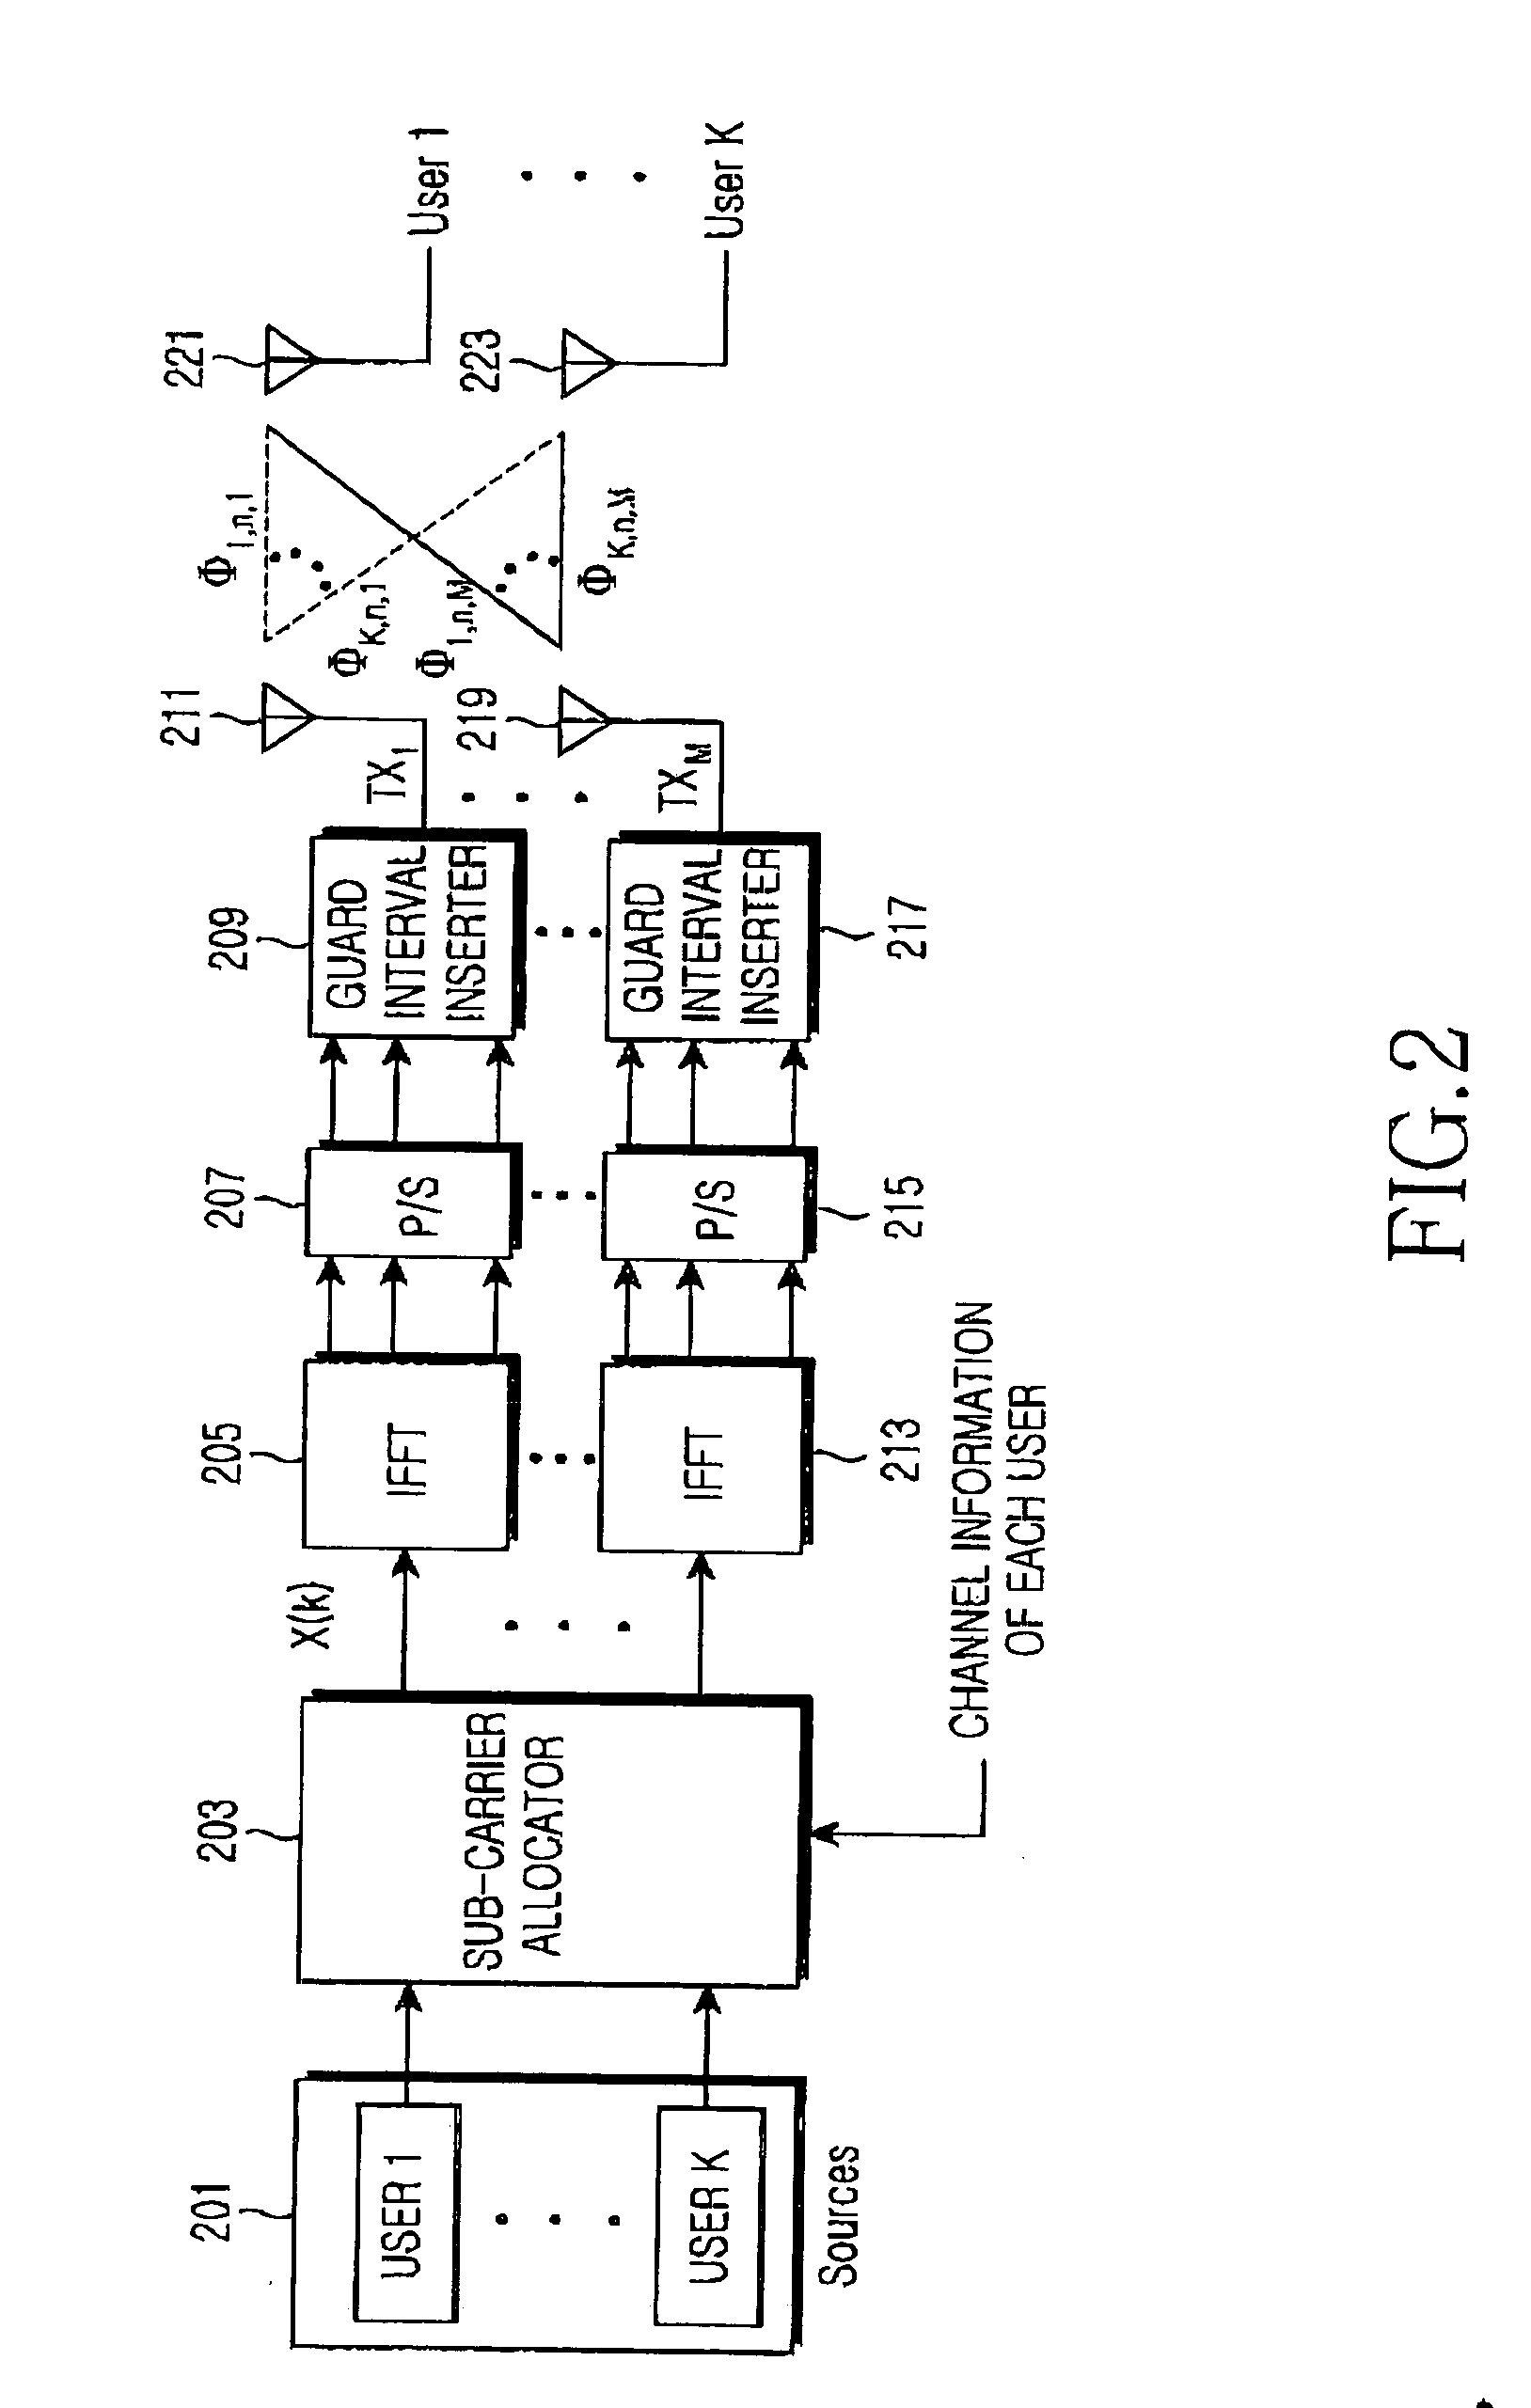 Apparatus and method for sub-carrier allocation in a multiple-input and multiple-output (MIMO) orthogonal frequency division multiplexing (OFDM) communication system